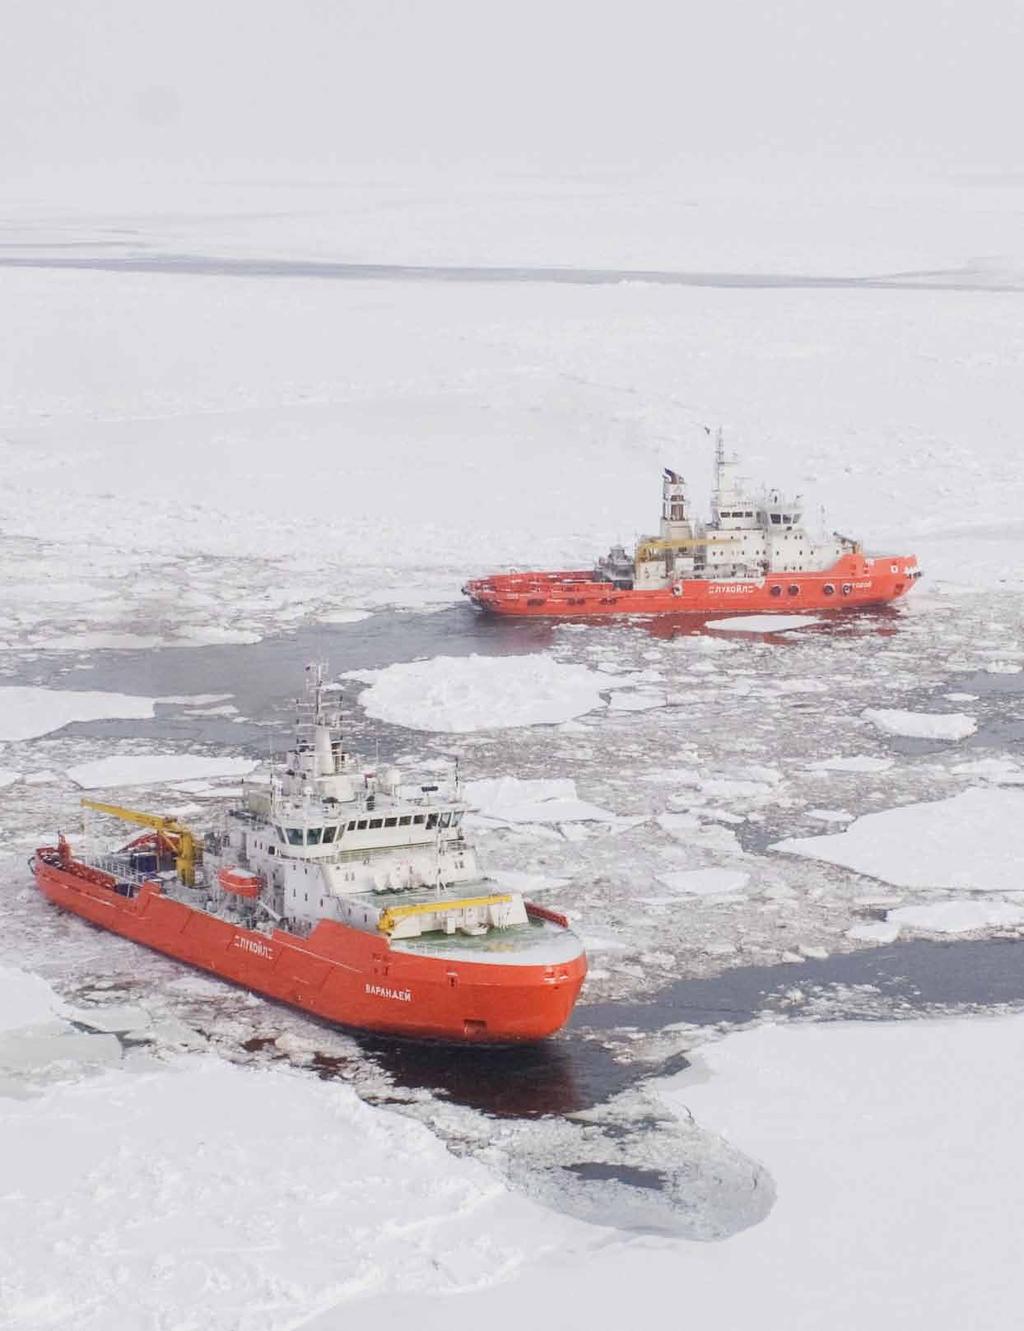 2 Ice-class solutions Our rich experience also includes a strong track record for sophisticated